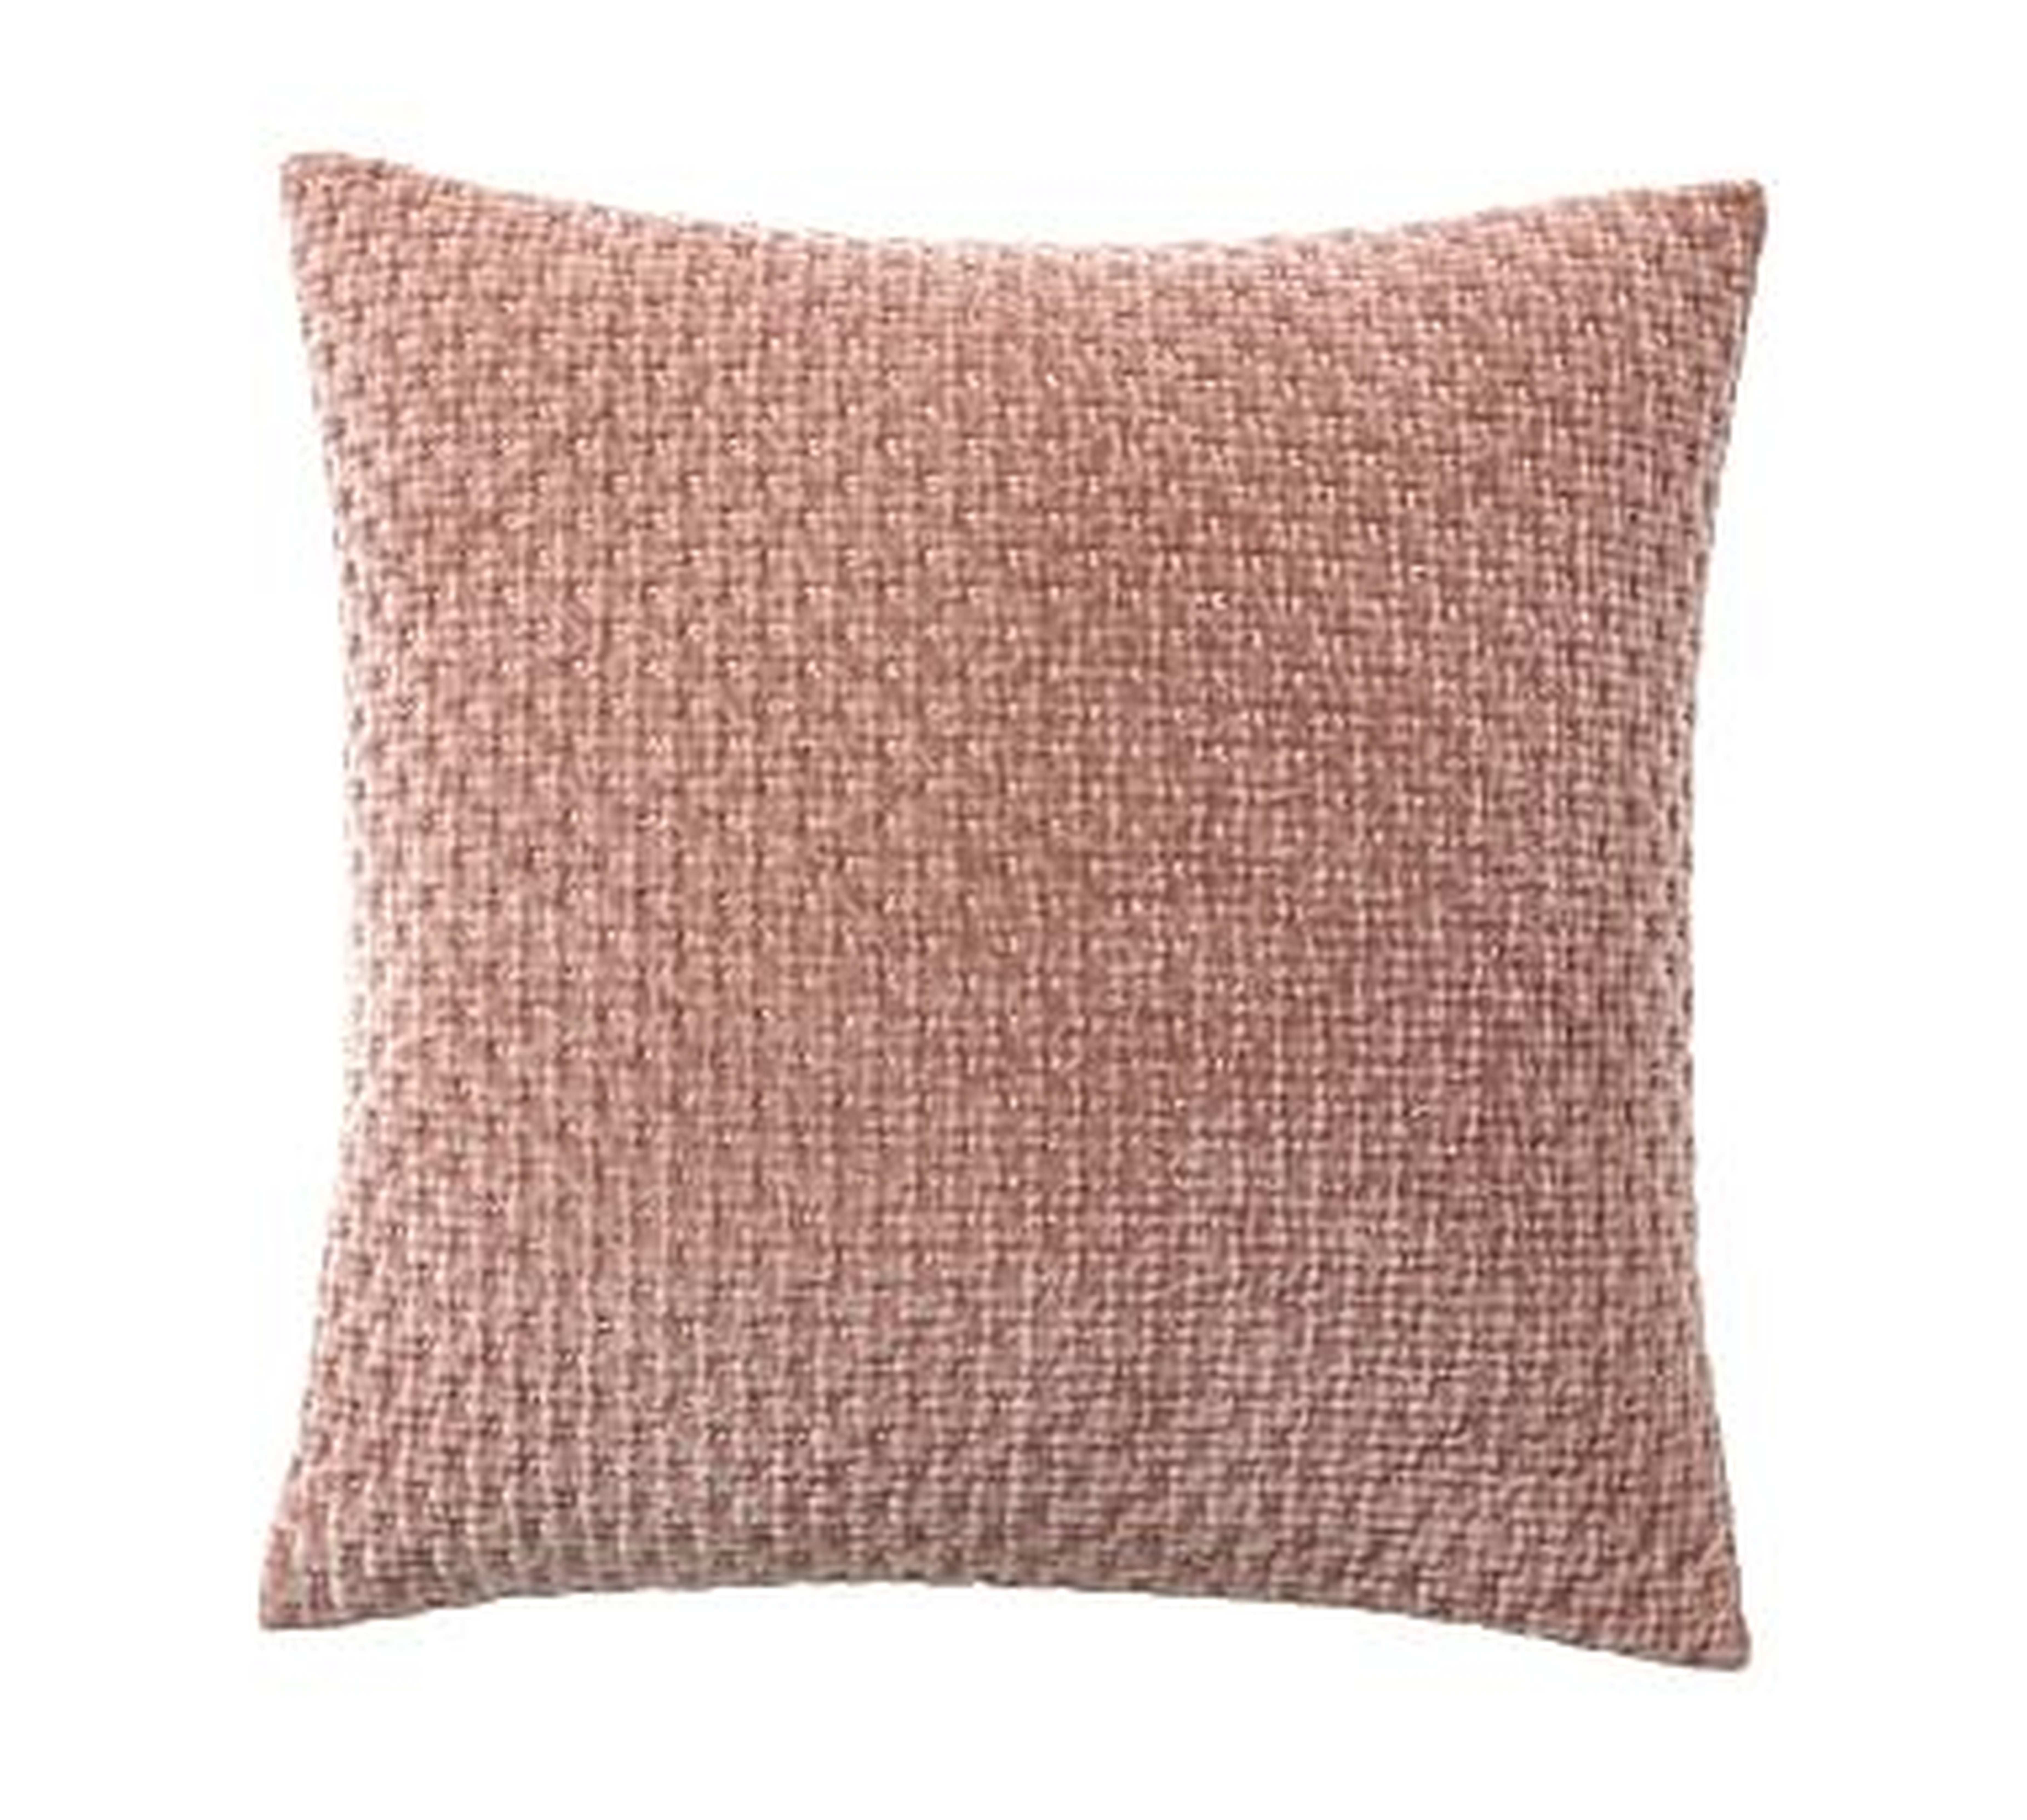 Stonewashed Cross-Stitched Pillow Cover, 20", Blush - Pottery Barn